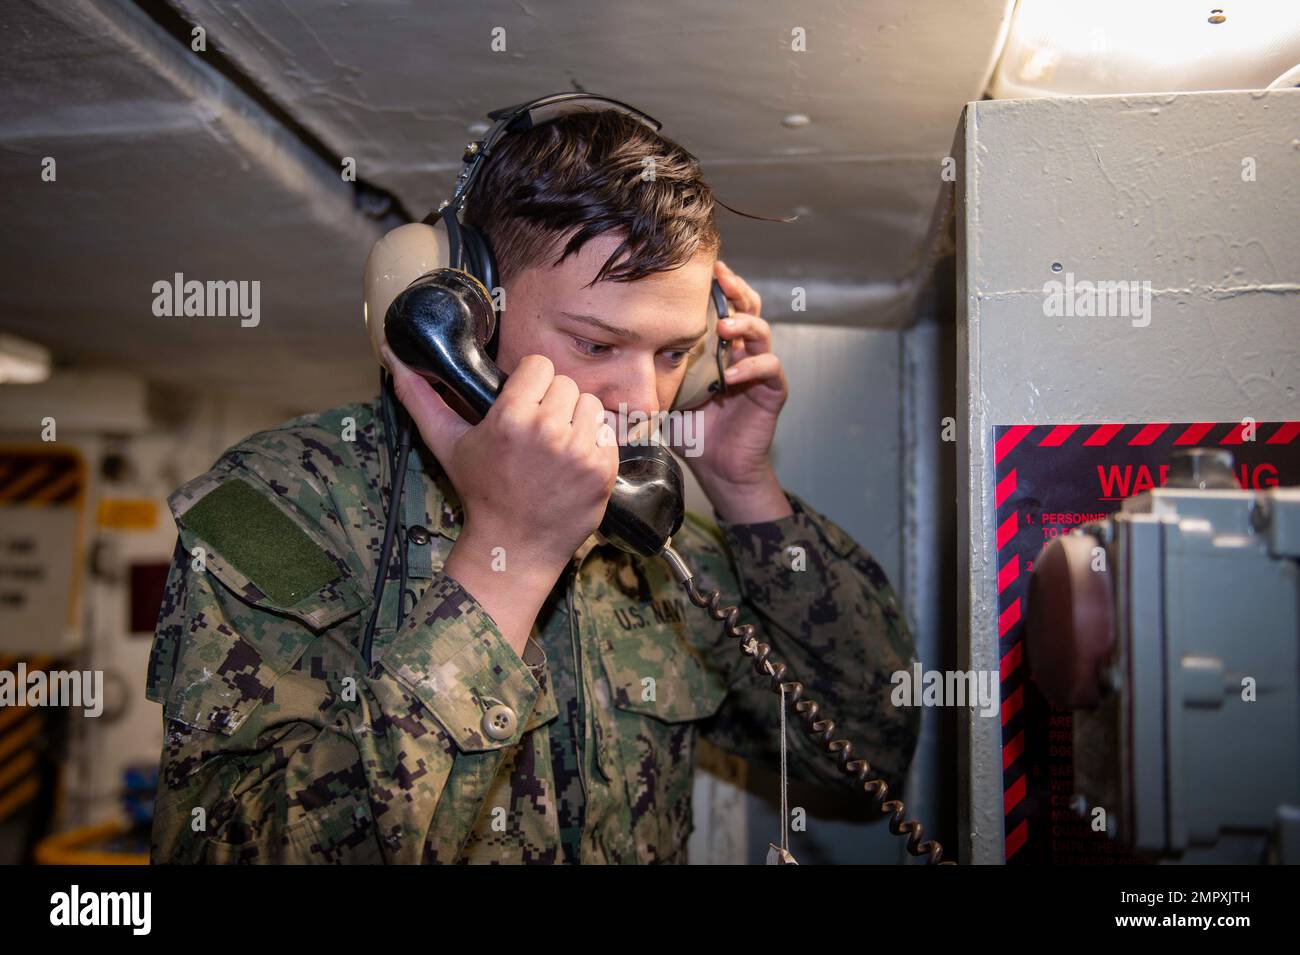 221121-N-IW069-1001 SAN DIEGO (Nov. 21, 2022) Aviation Ordnancemen Airman Logan Dickinson, a native of Longview, Wash., works as a phone talker while moving ordnance during a weapons evolution aboard Nimitz-class aircraft carrier USS Carl Vinson (CVN 70). Vinson is currently pierside in its homeport of San Diego. Stock Photo